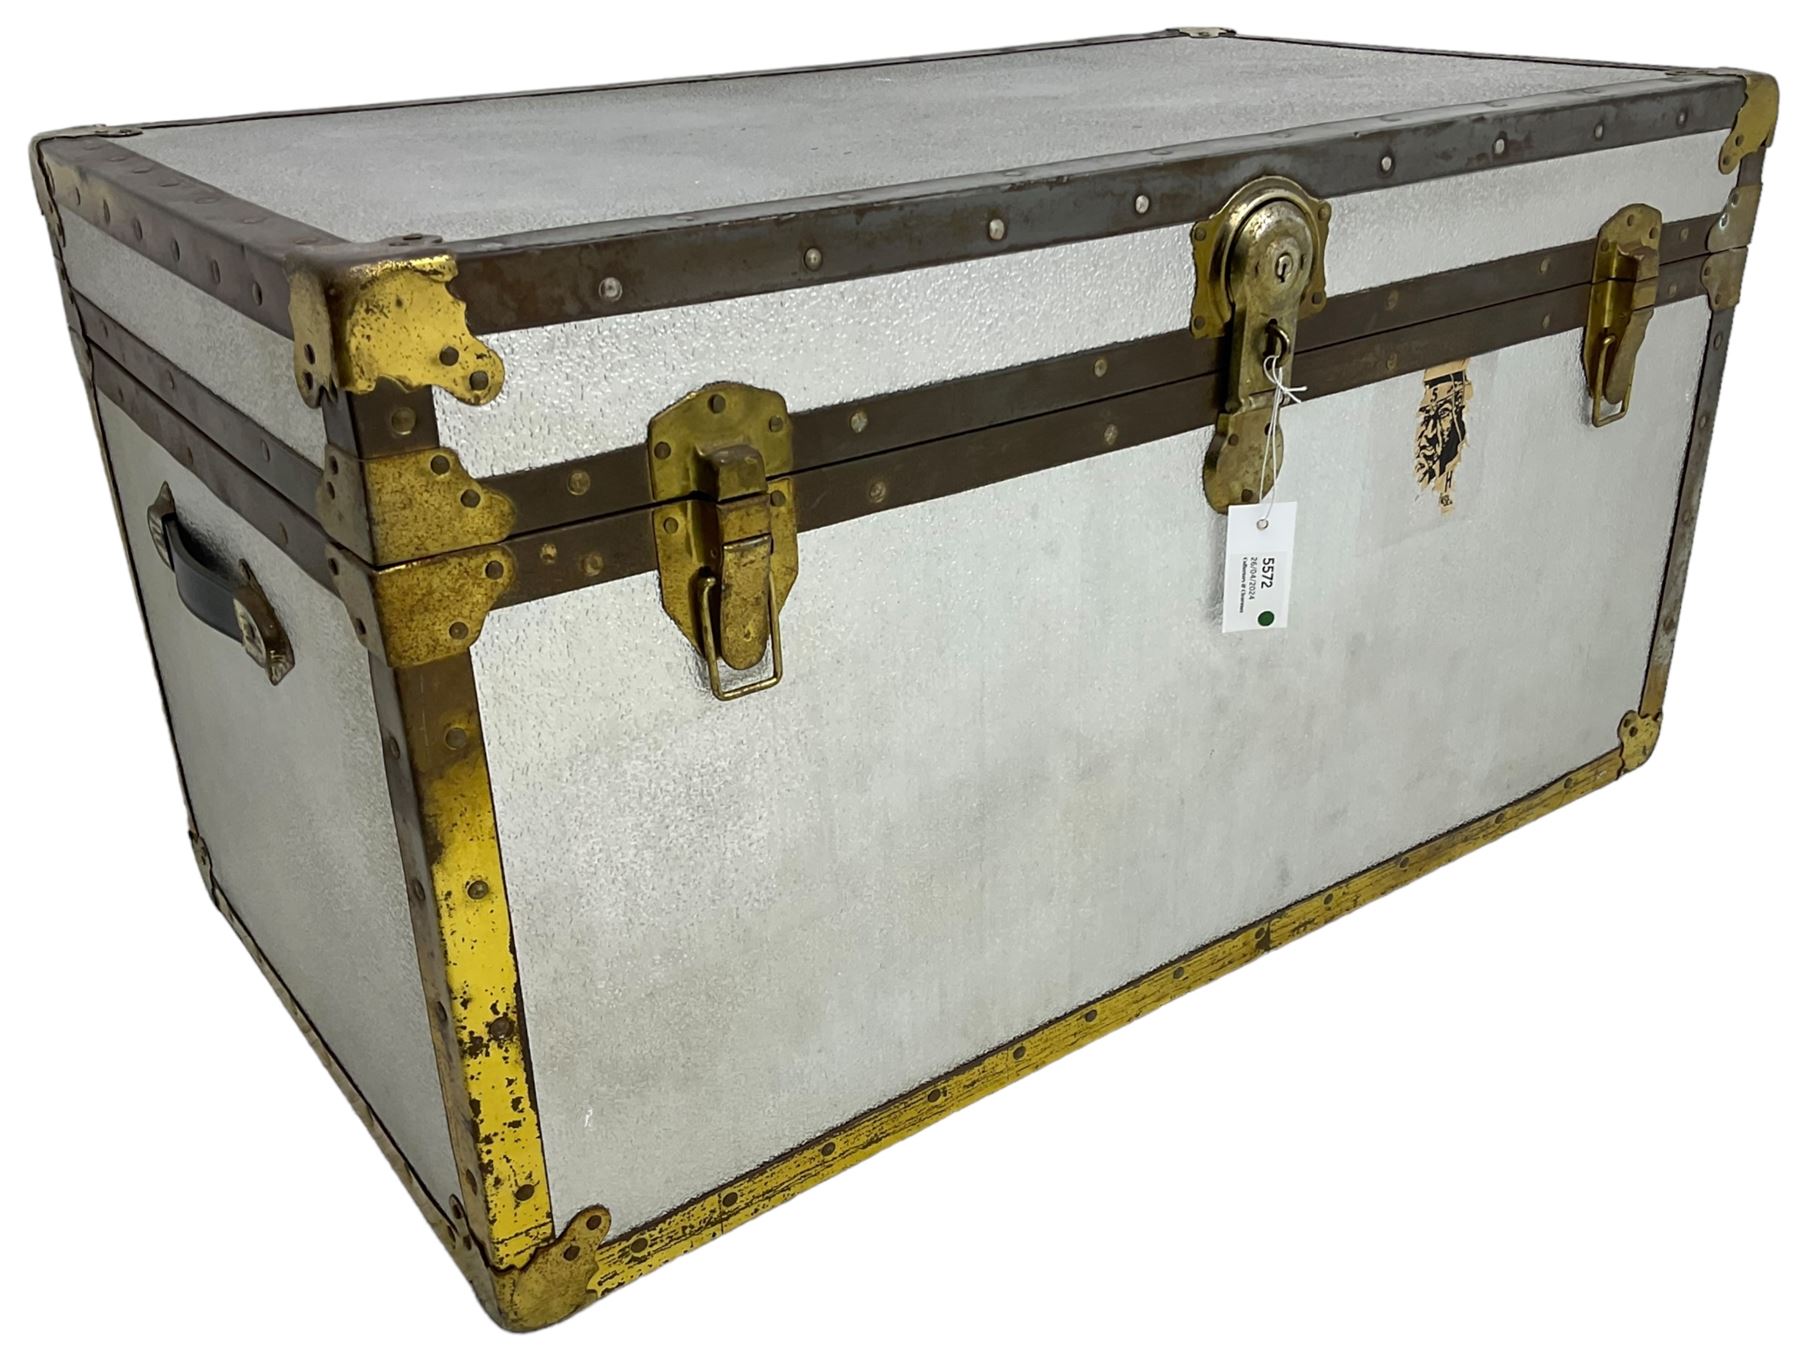 Mid-20th century metal travelling trunk - Image 2 of 2